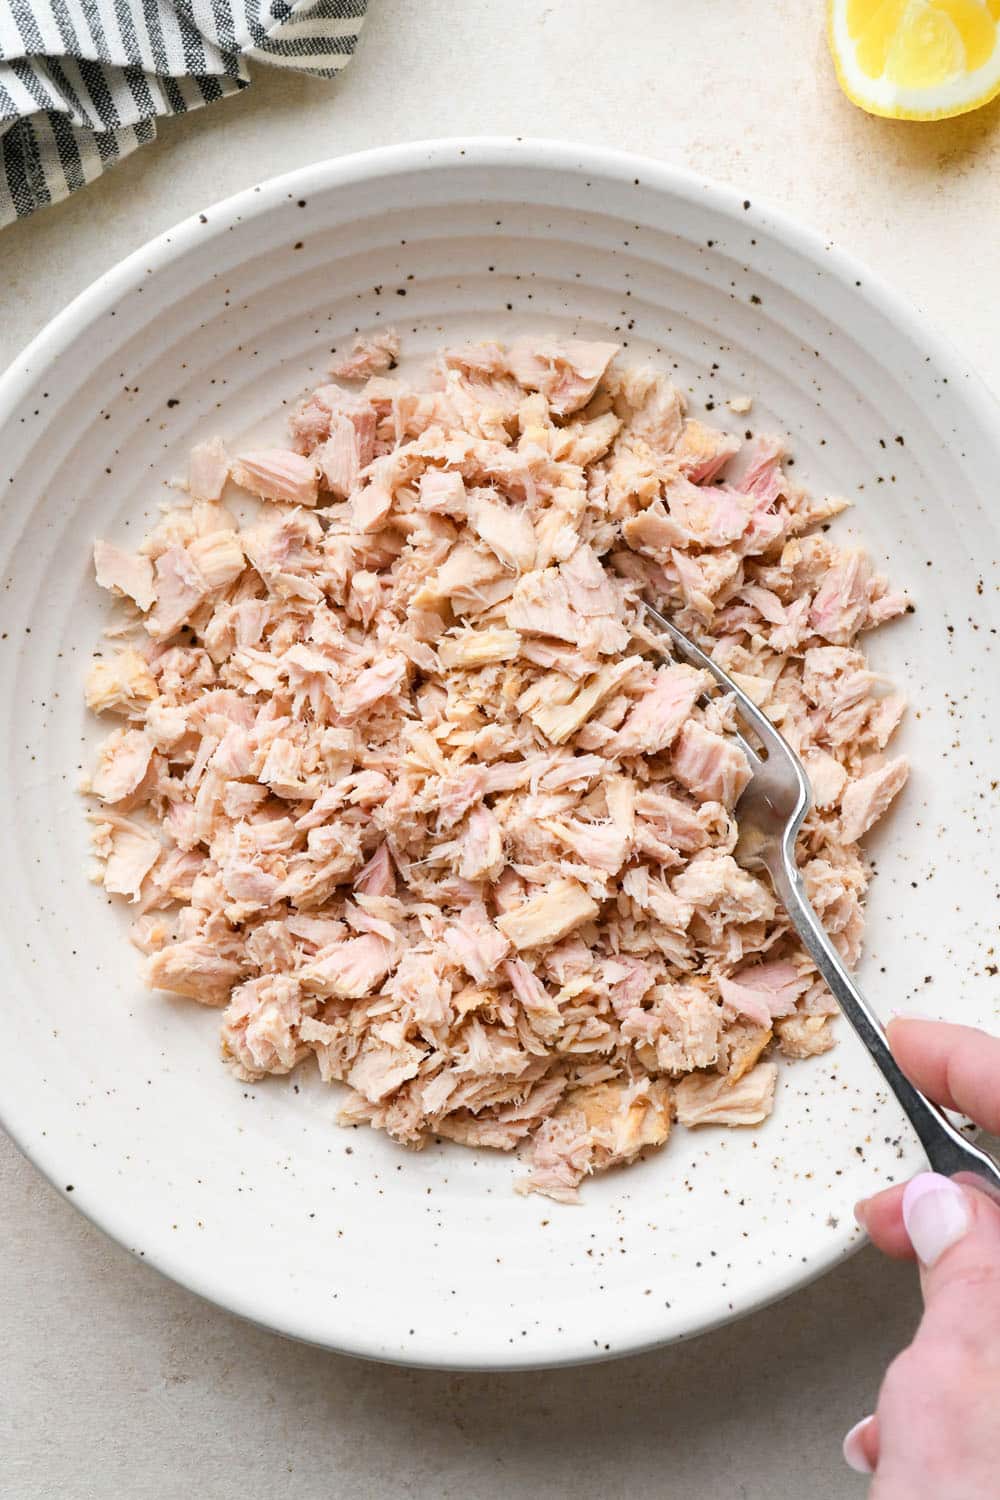 How to make tuna salad: Drained tuna added to a large bowl and flaked apart with a fork.